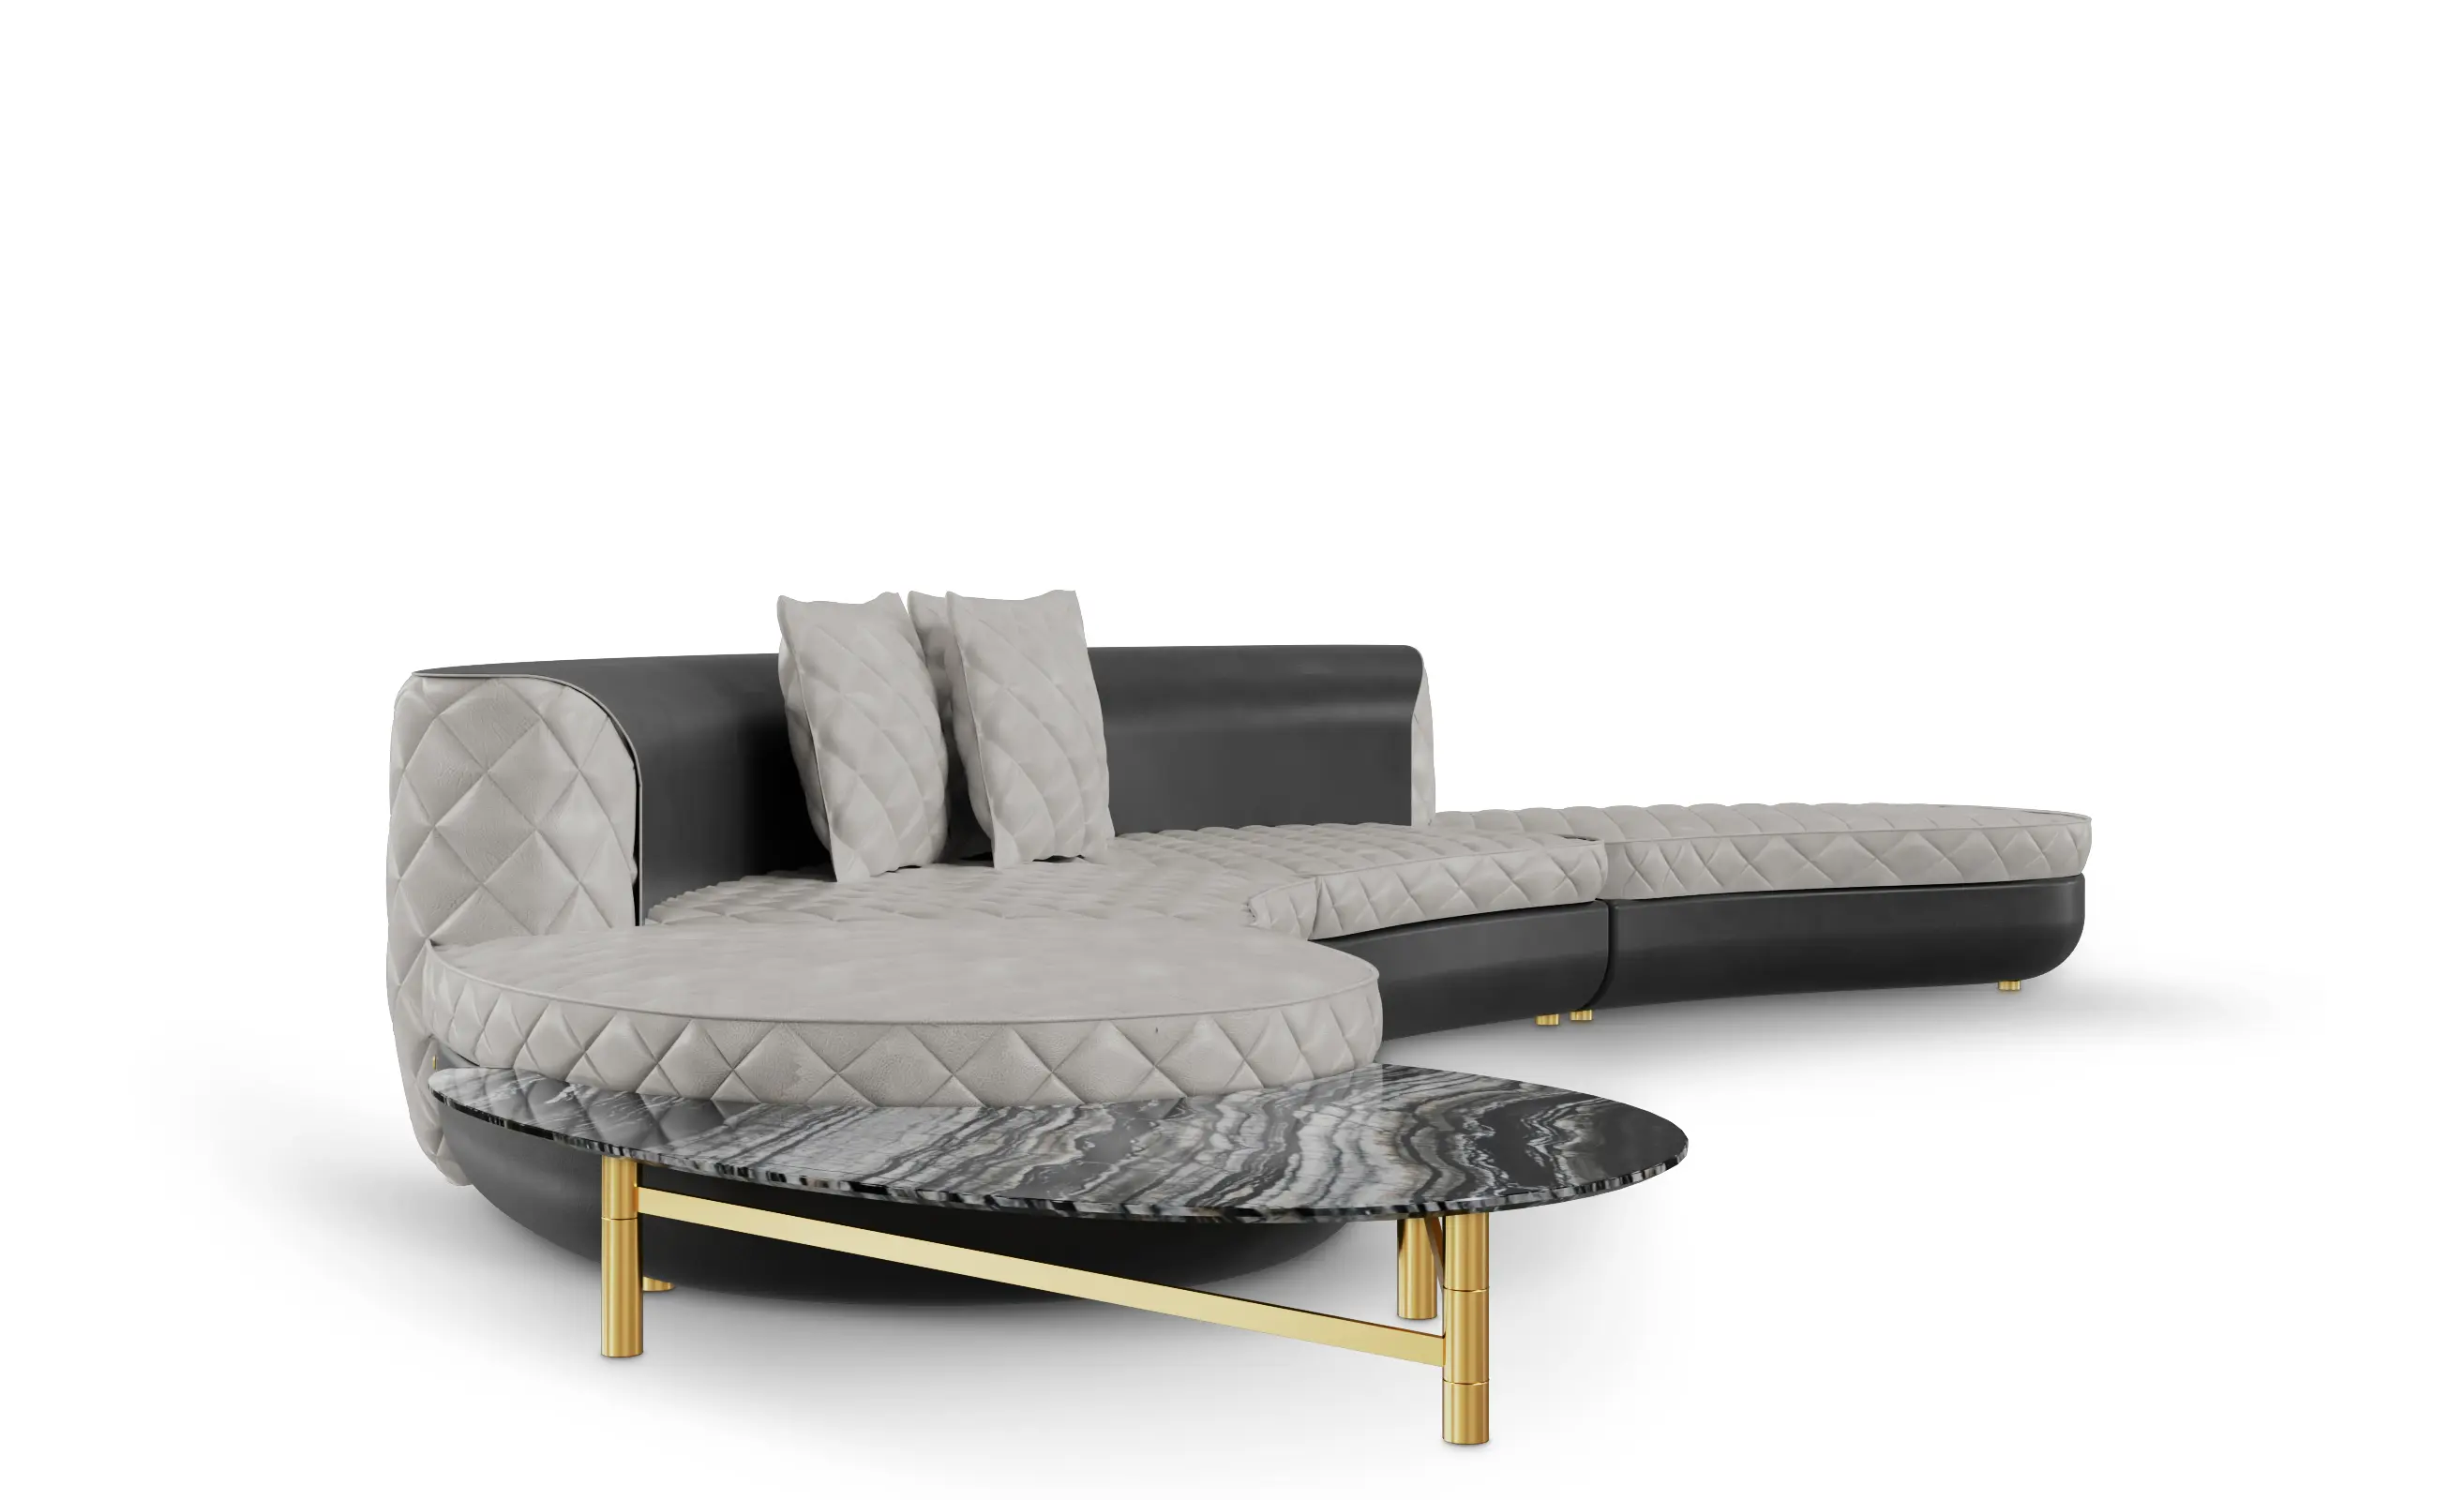 NYC - Breathtaking Sofas for your Living Room